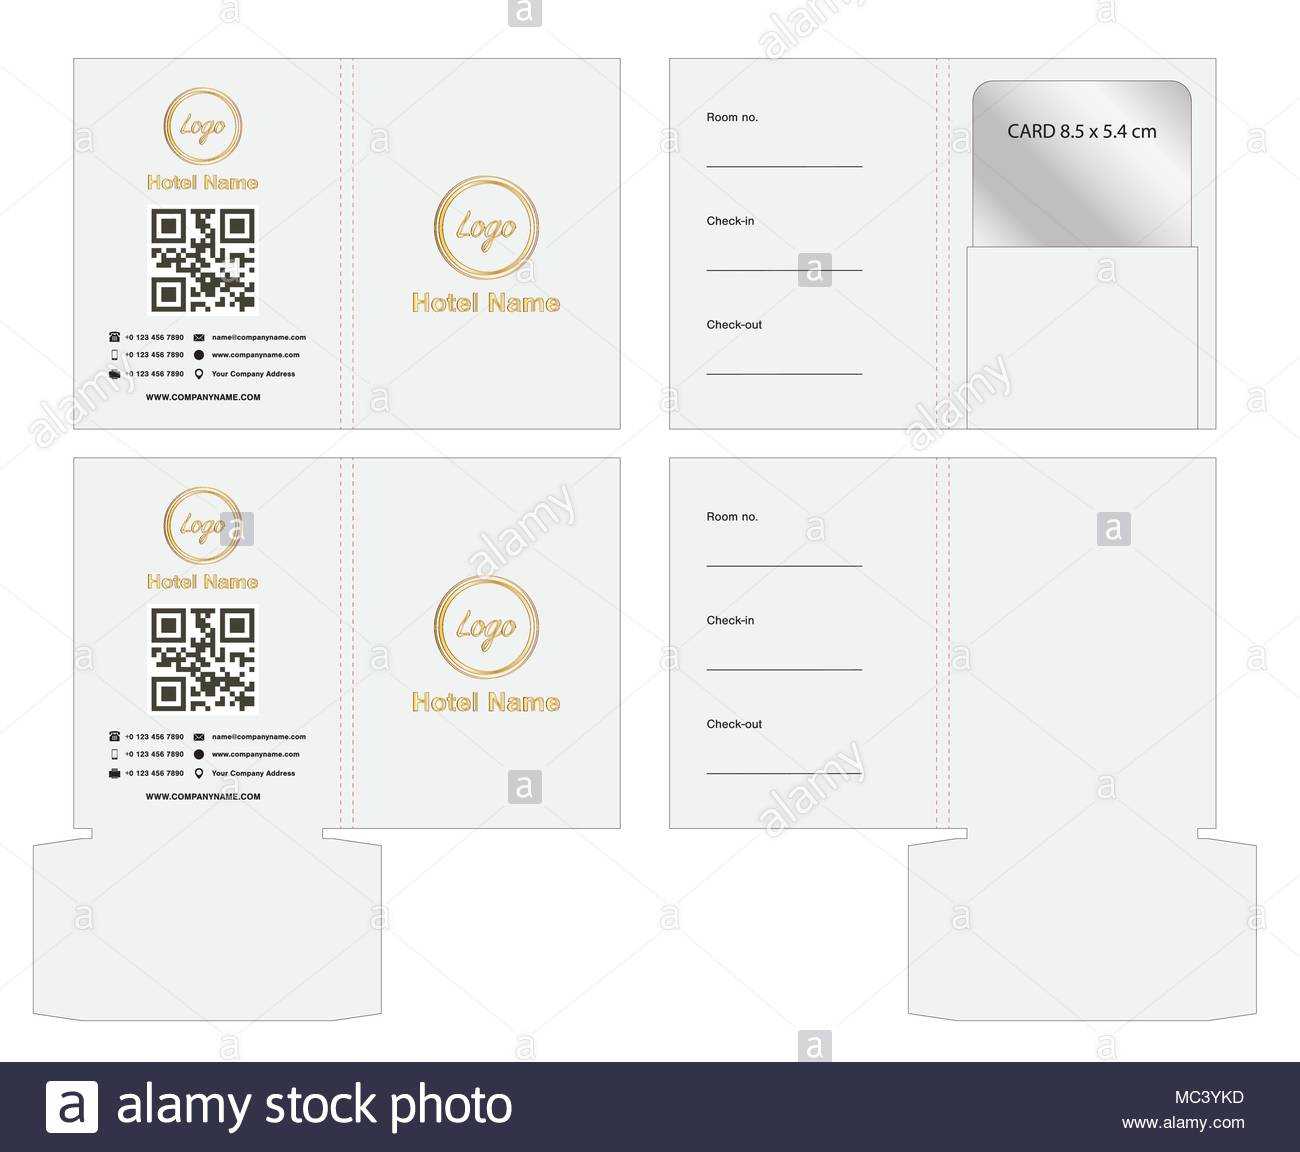 Key Card Envelope Die Cut Template Mock Up Illustration With Hotel Key Card Template